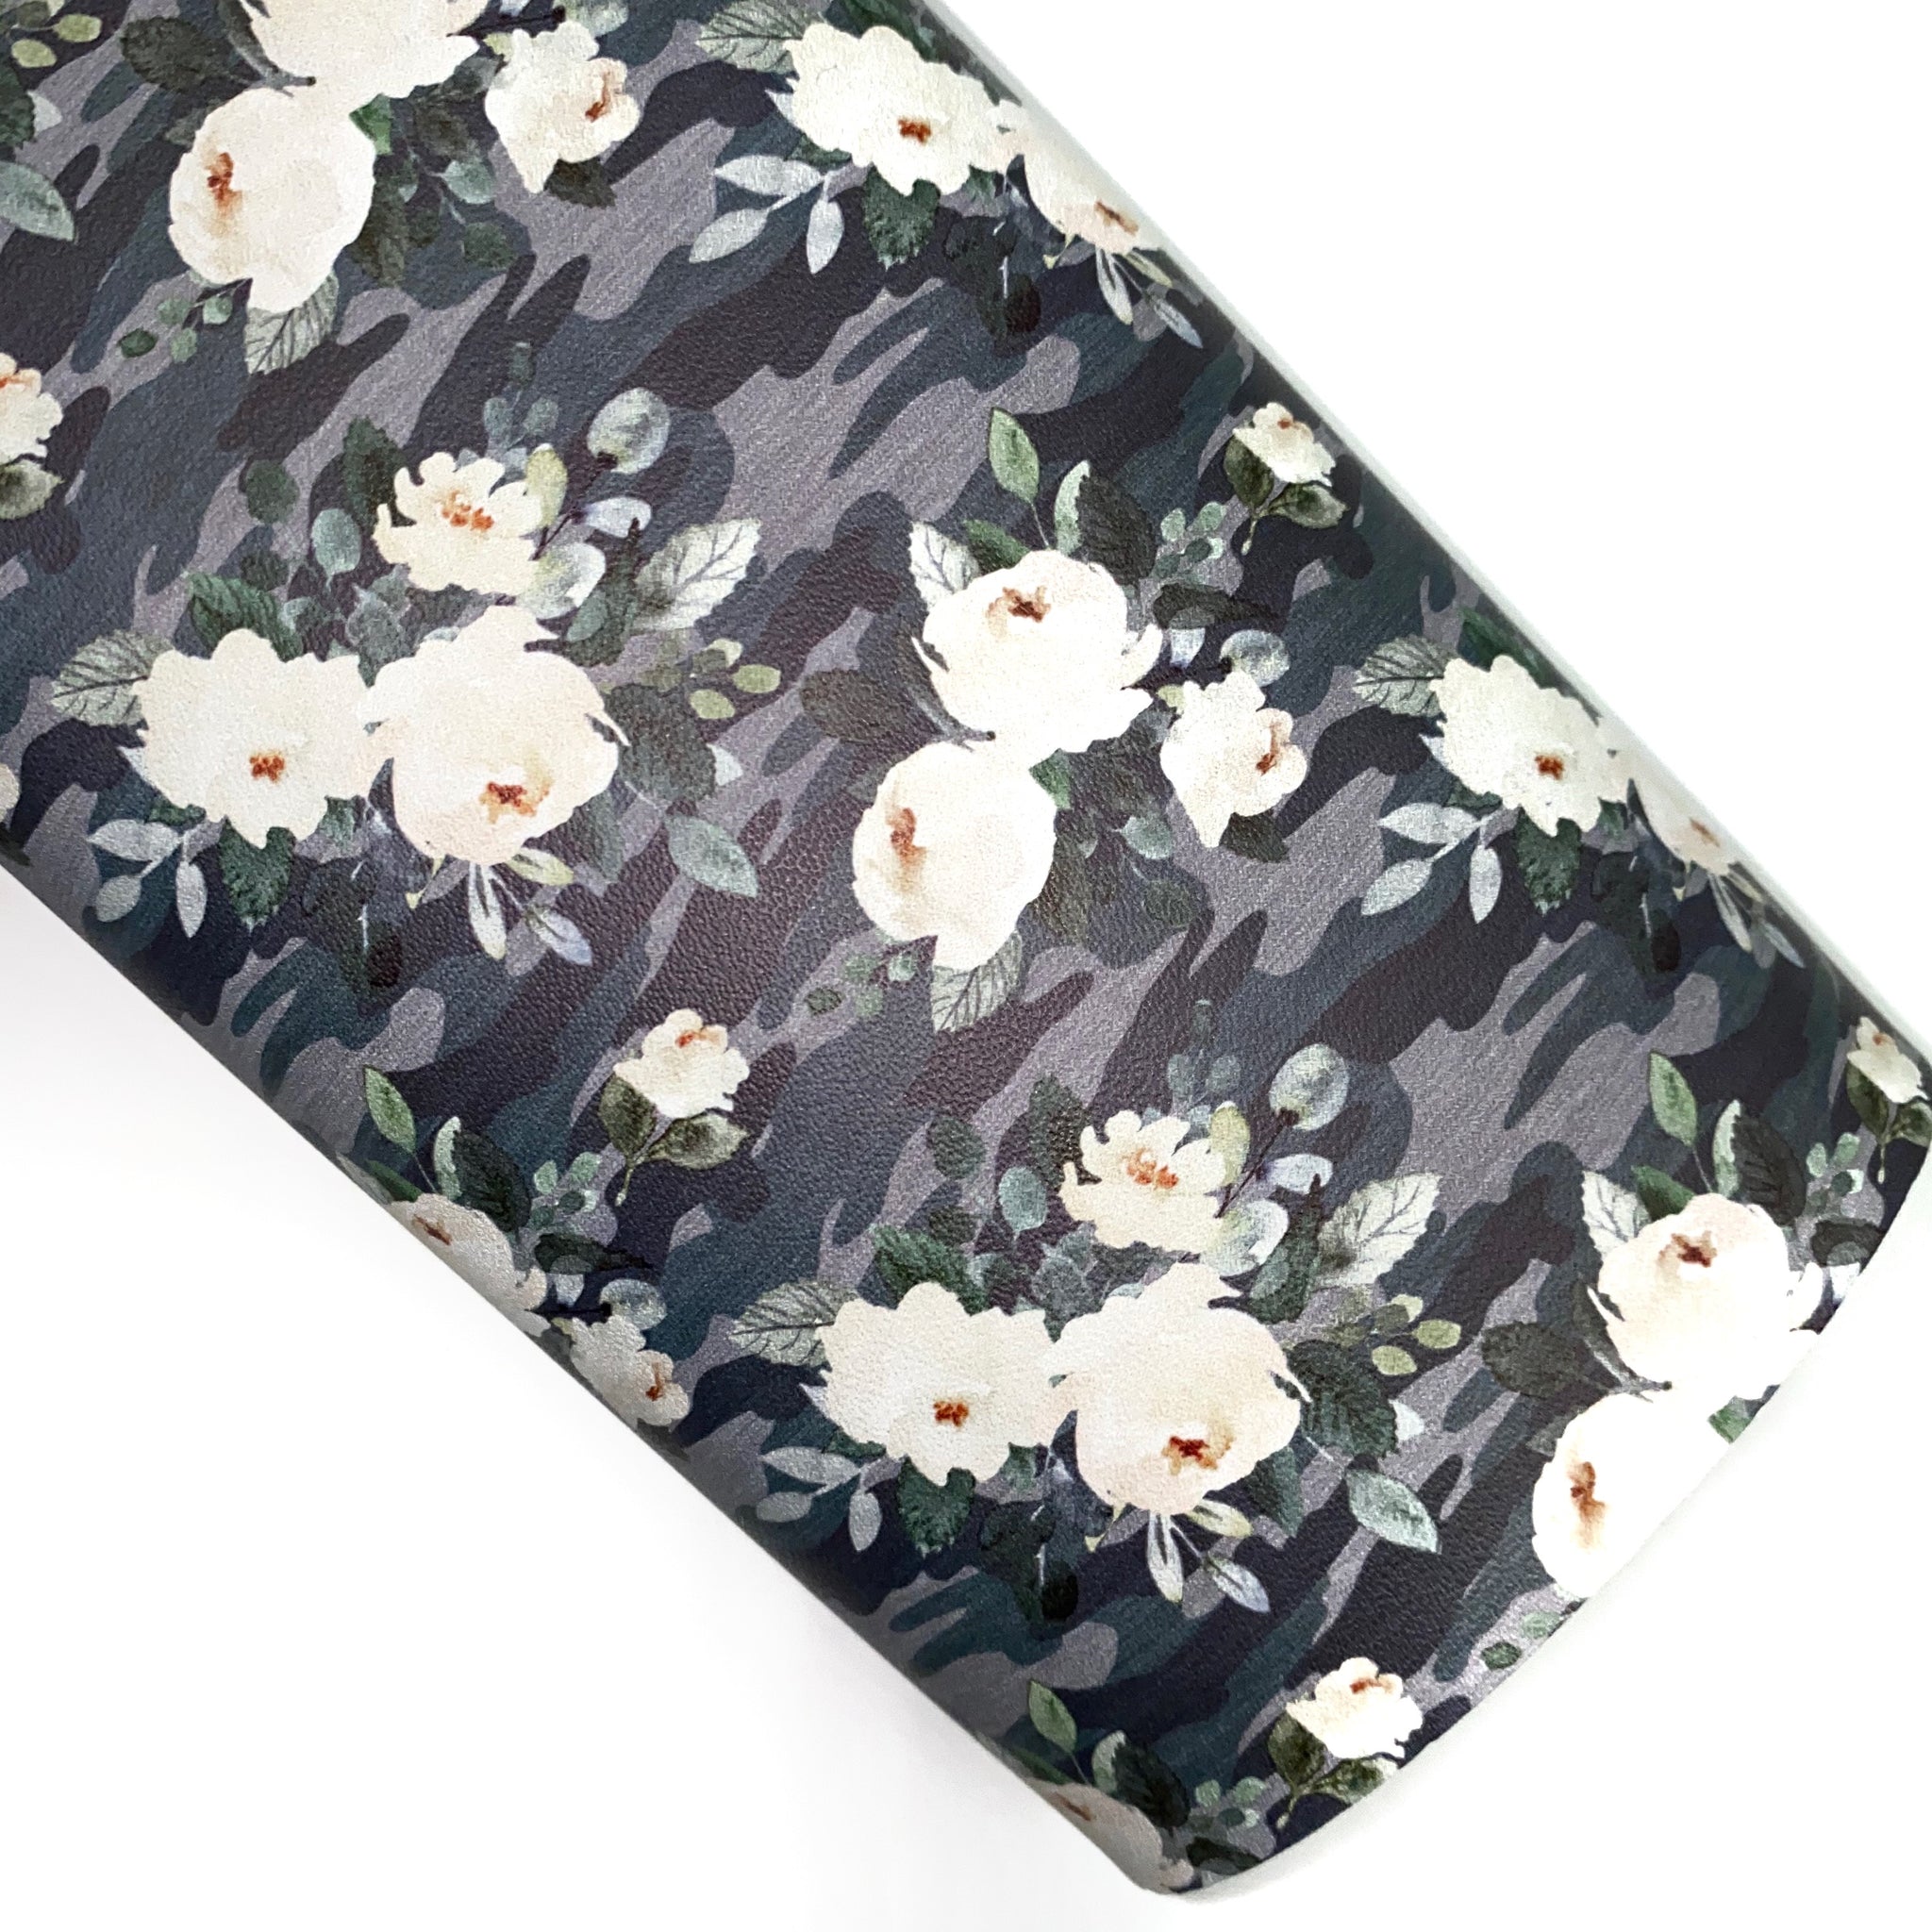 Camo Floral Custom Print on Smooth Faux Leather